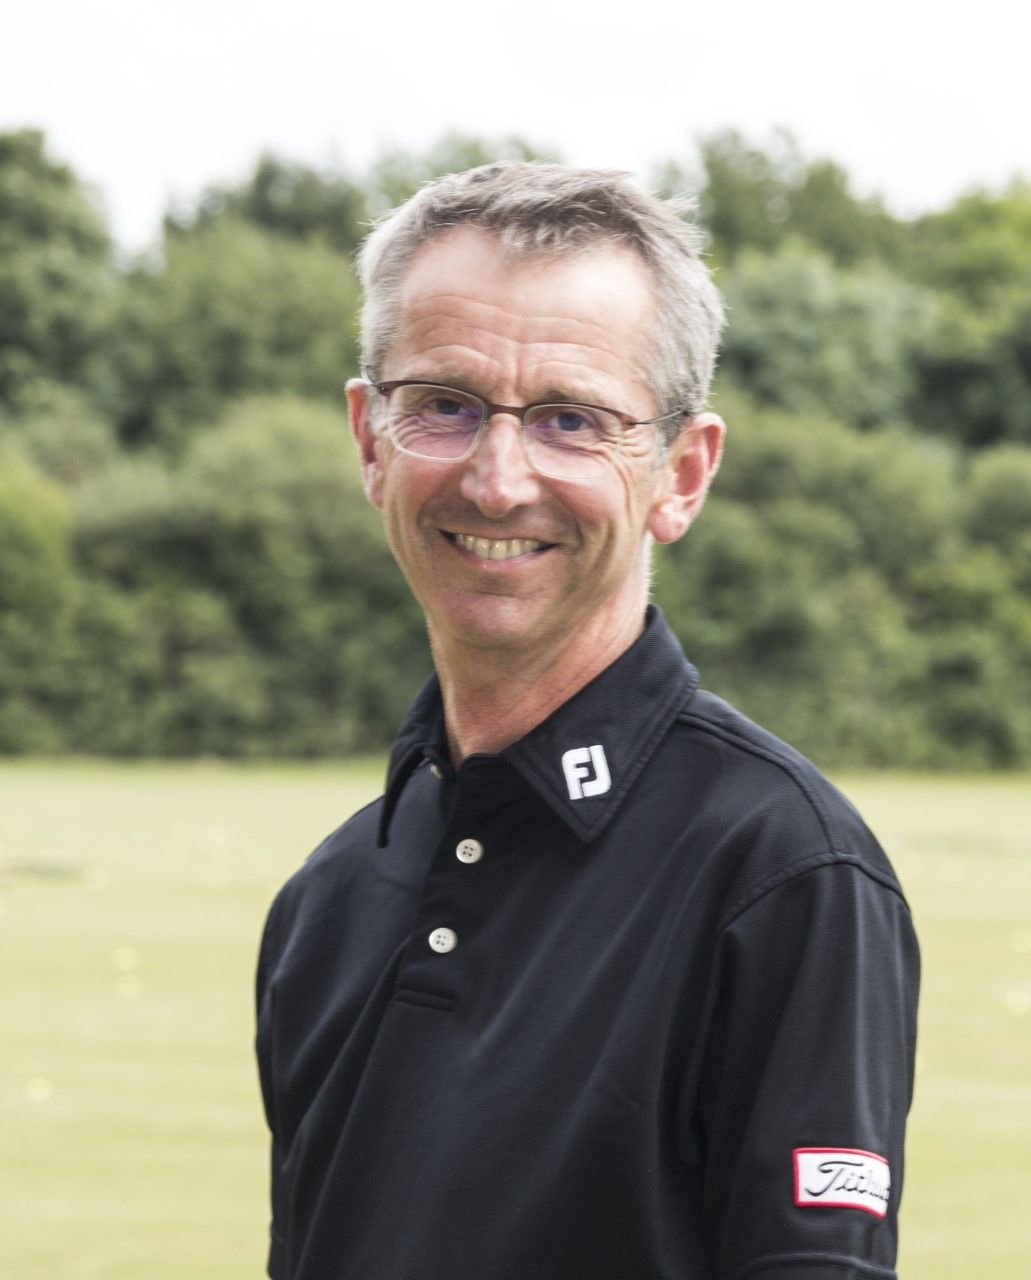 Golf: The benefits of picking the game up at any age, TheBoldAge talks to Paul Ashwell a top 25 golf coach